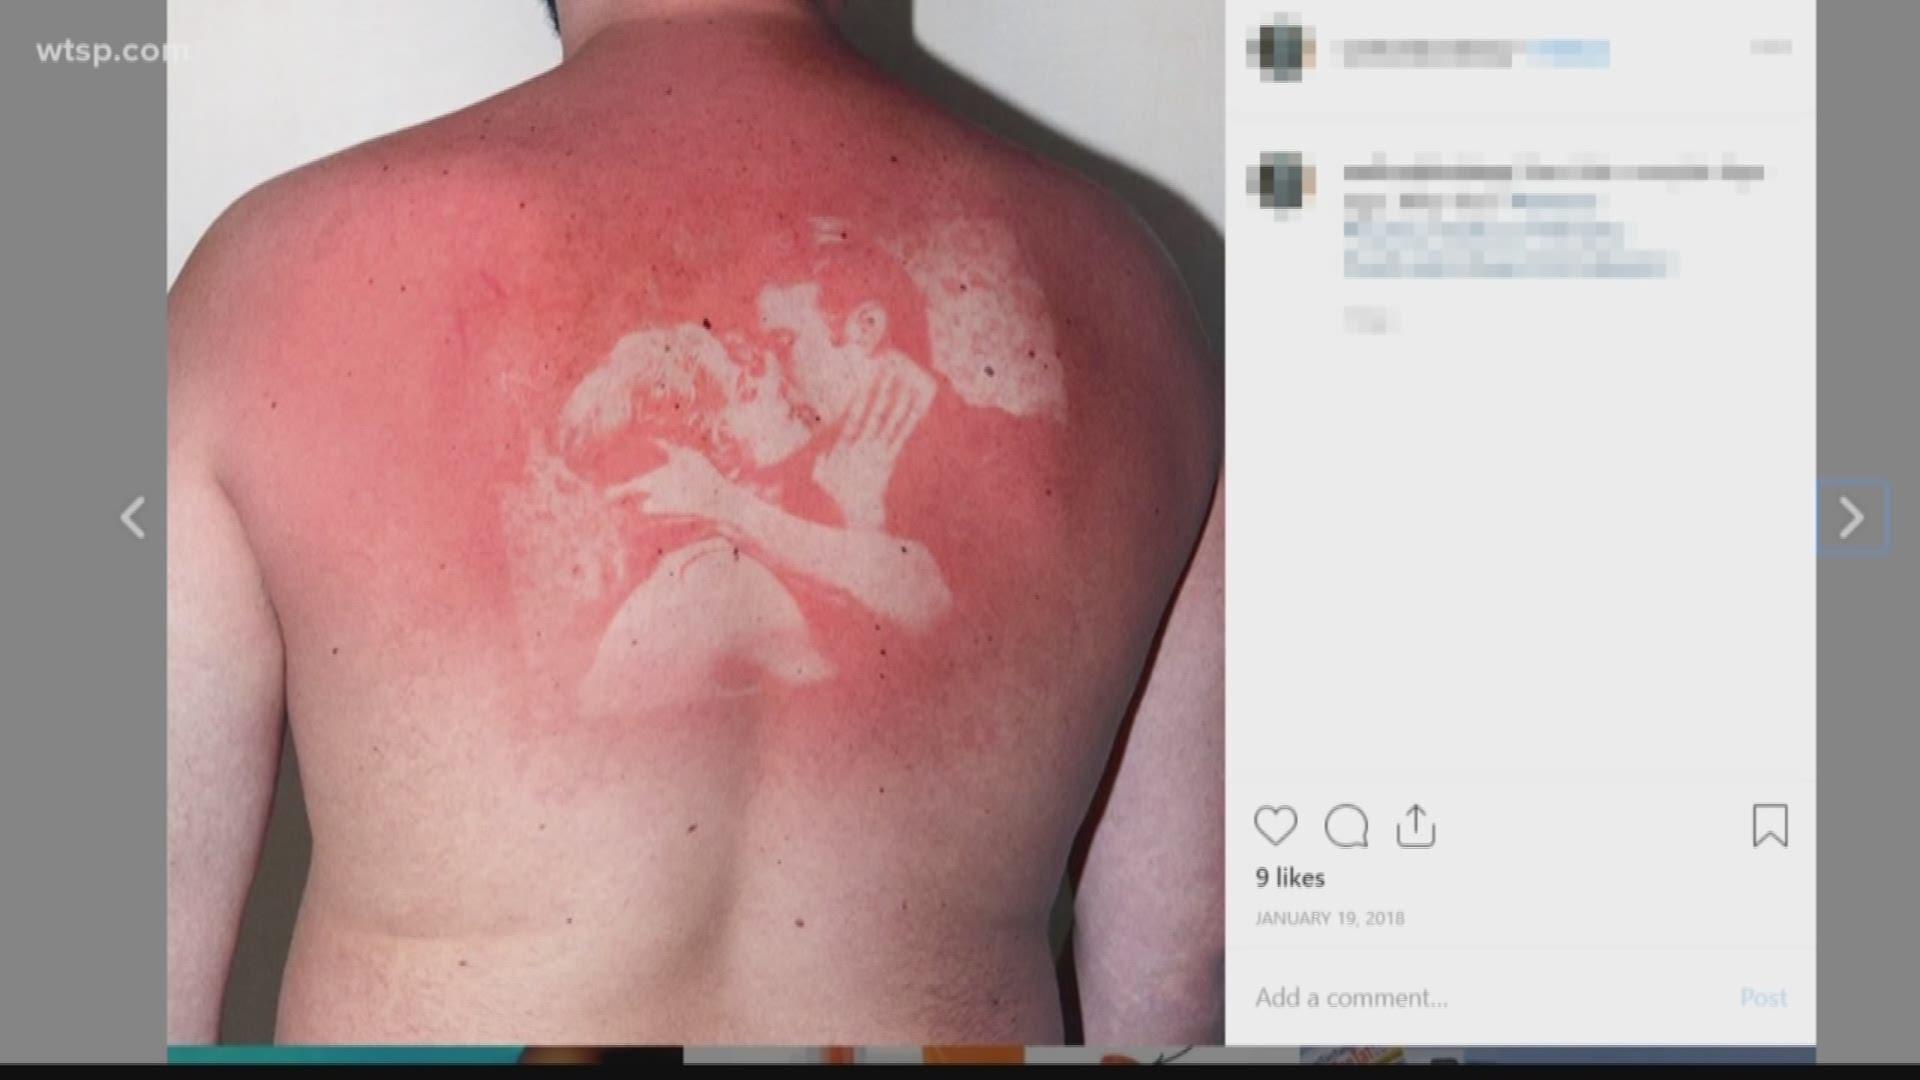 Sunburn art Shocking snaps show people are risking skin cancer to paint  angry red shapes on their bodies  Mirror Online